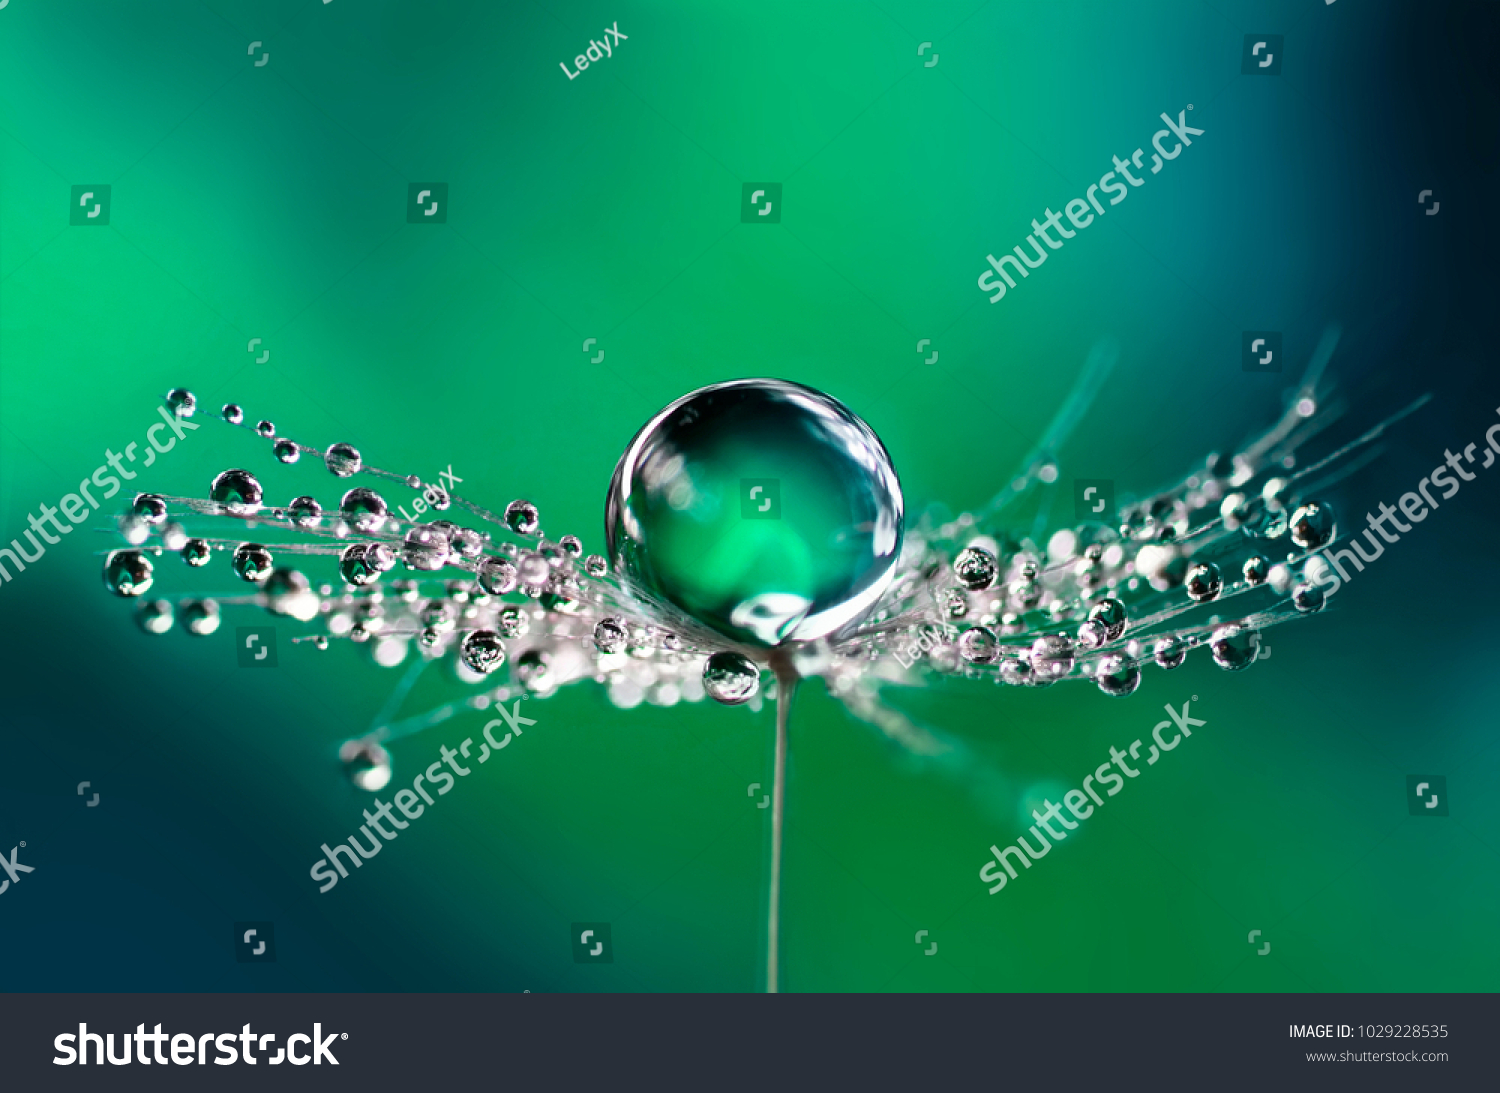 Beautiful water drops on a dandelion seed macro in nature. Beautiful blurred green and blue background. Dew drops on dandelion with free space. Bright colorful dreamy artistic image #1029228535